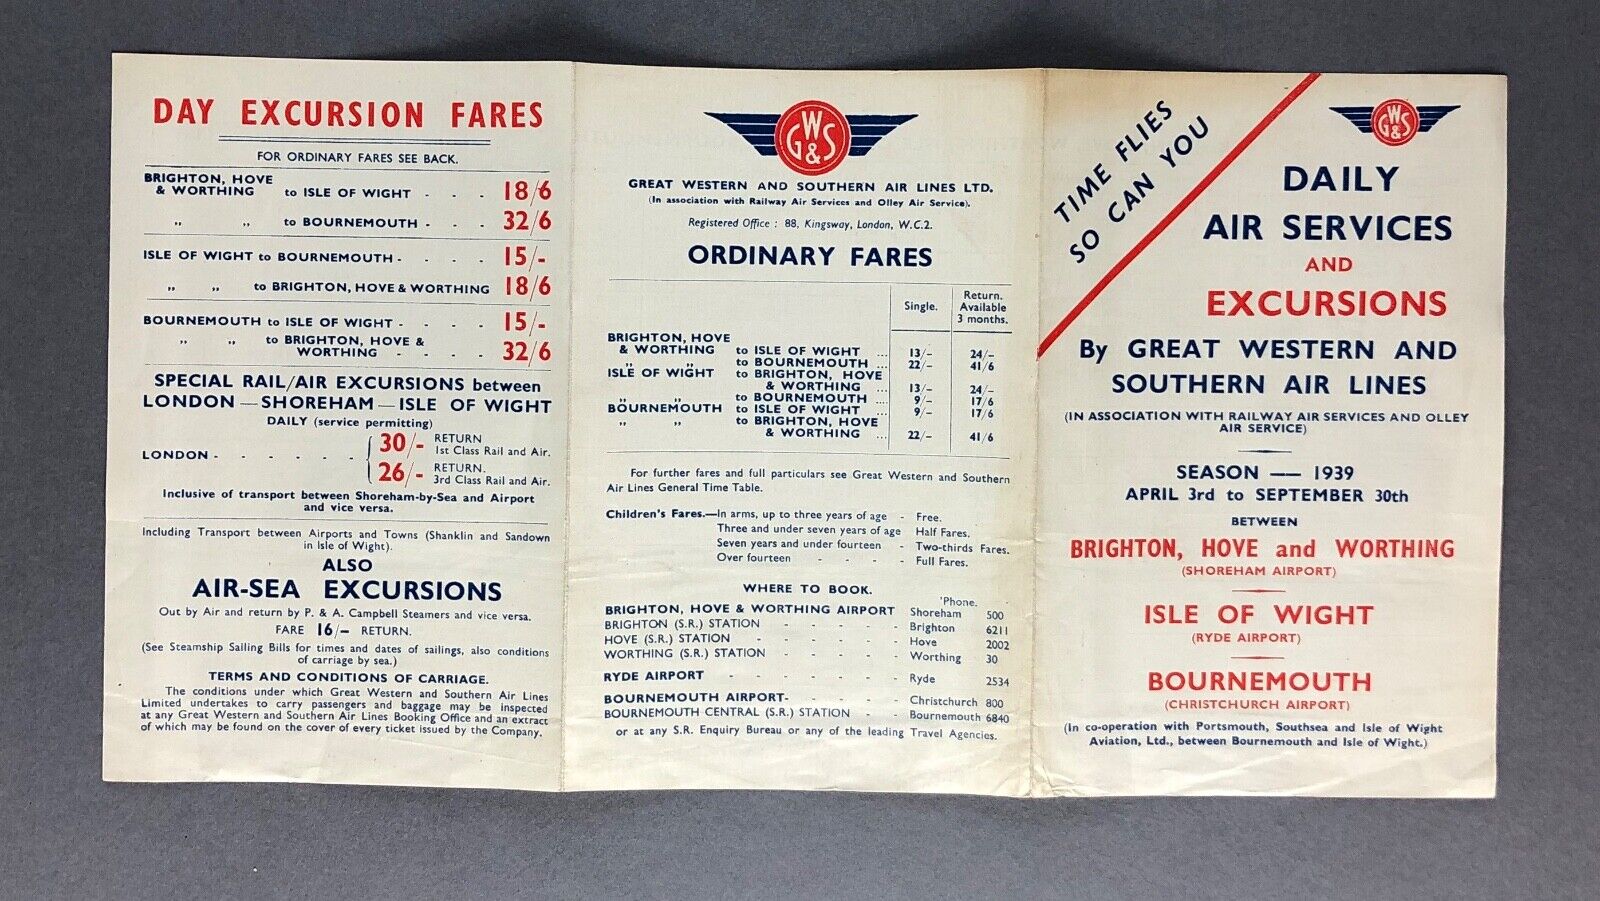 GWS GREAT WESTERN & SOUTHERN AIRLINES SUMMER 1939 AIRLINE TIMETABLE